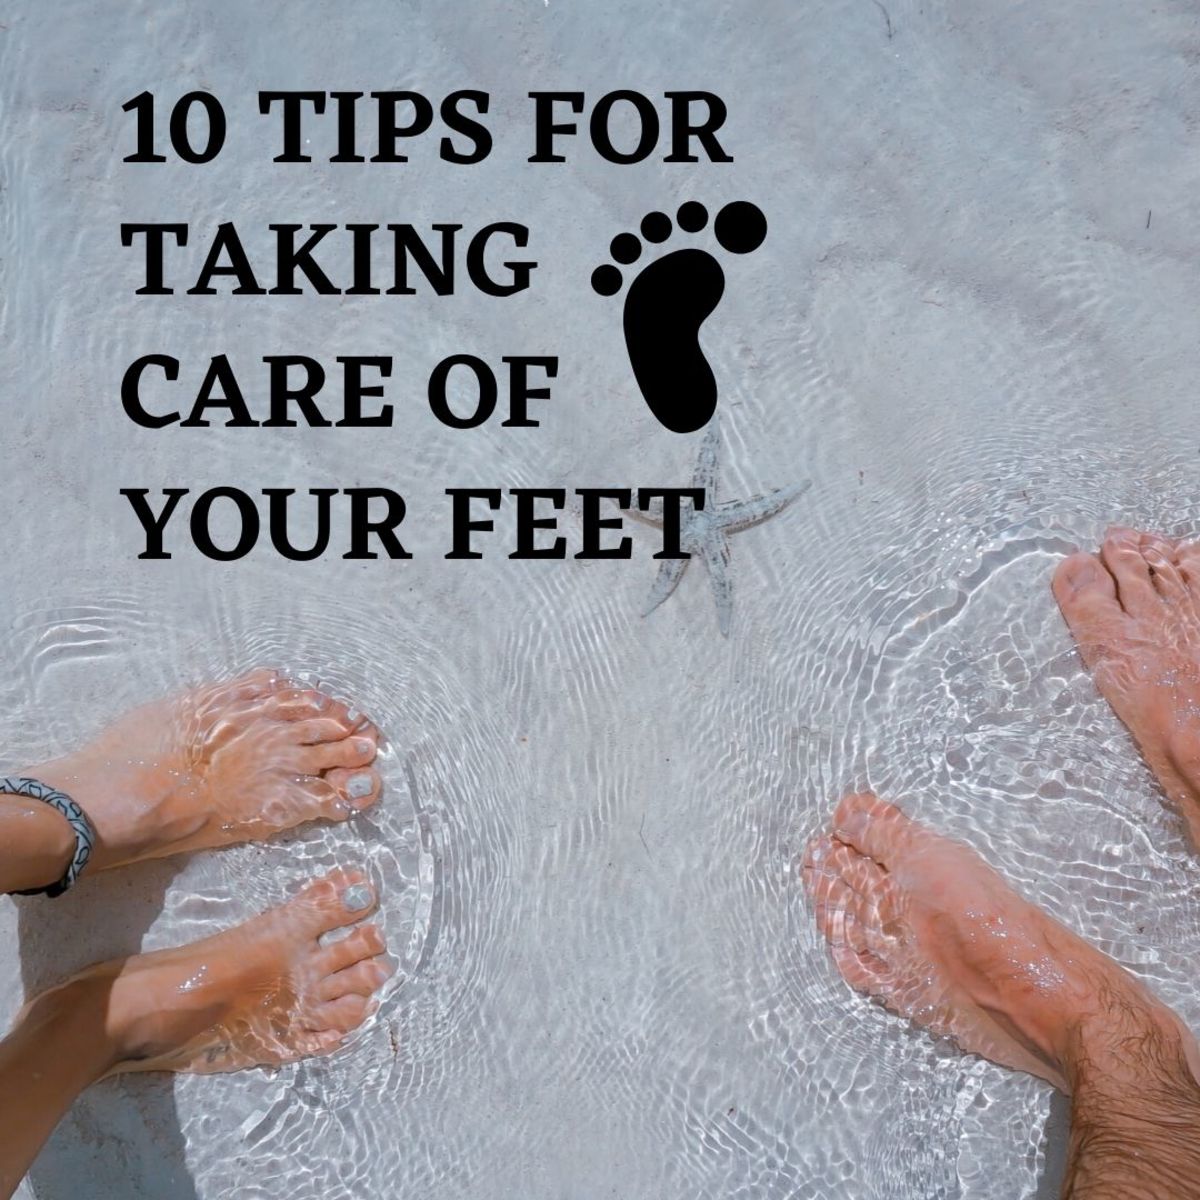 Read on to discover 10 ways to keep your feet happy, healthy, and beautiful!